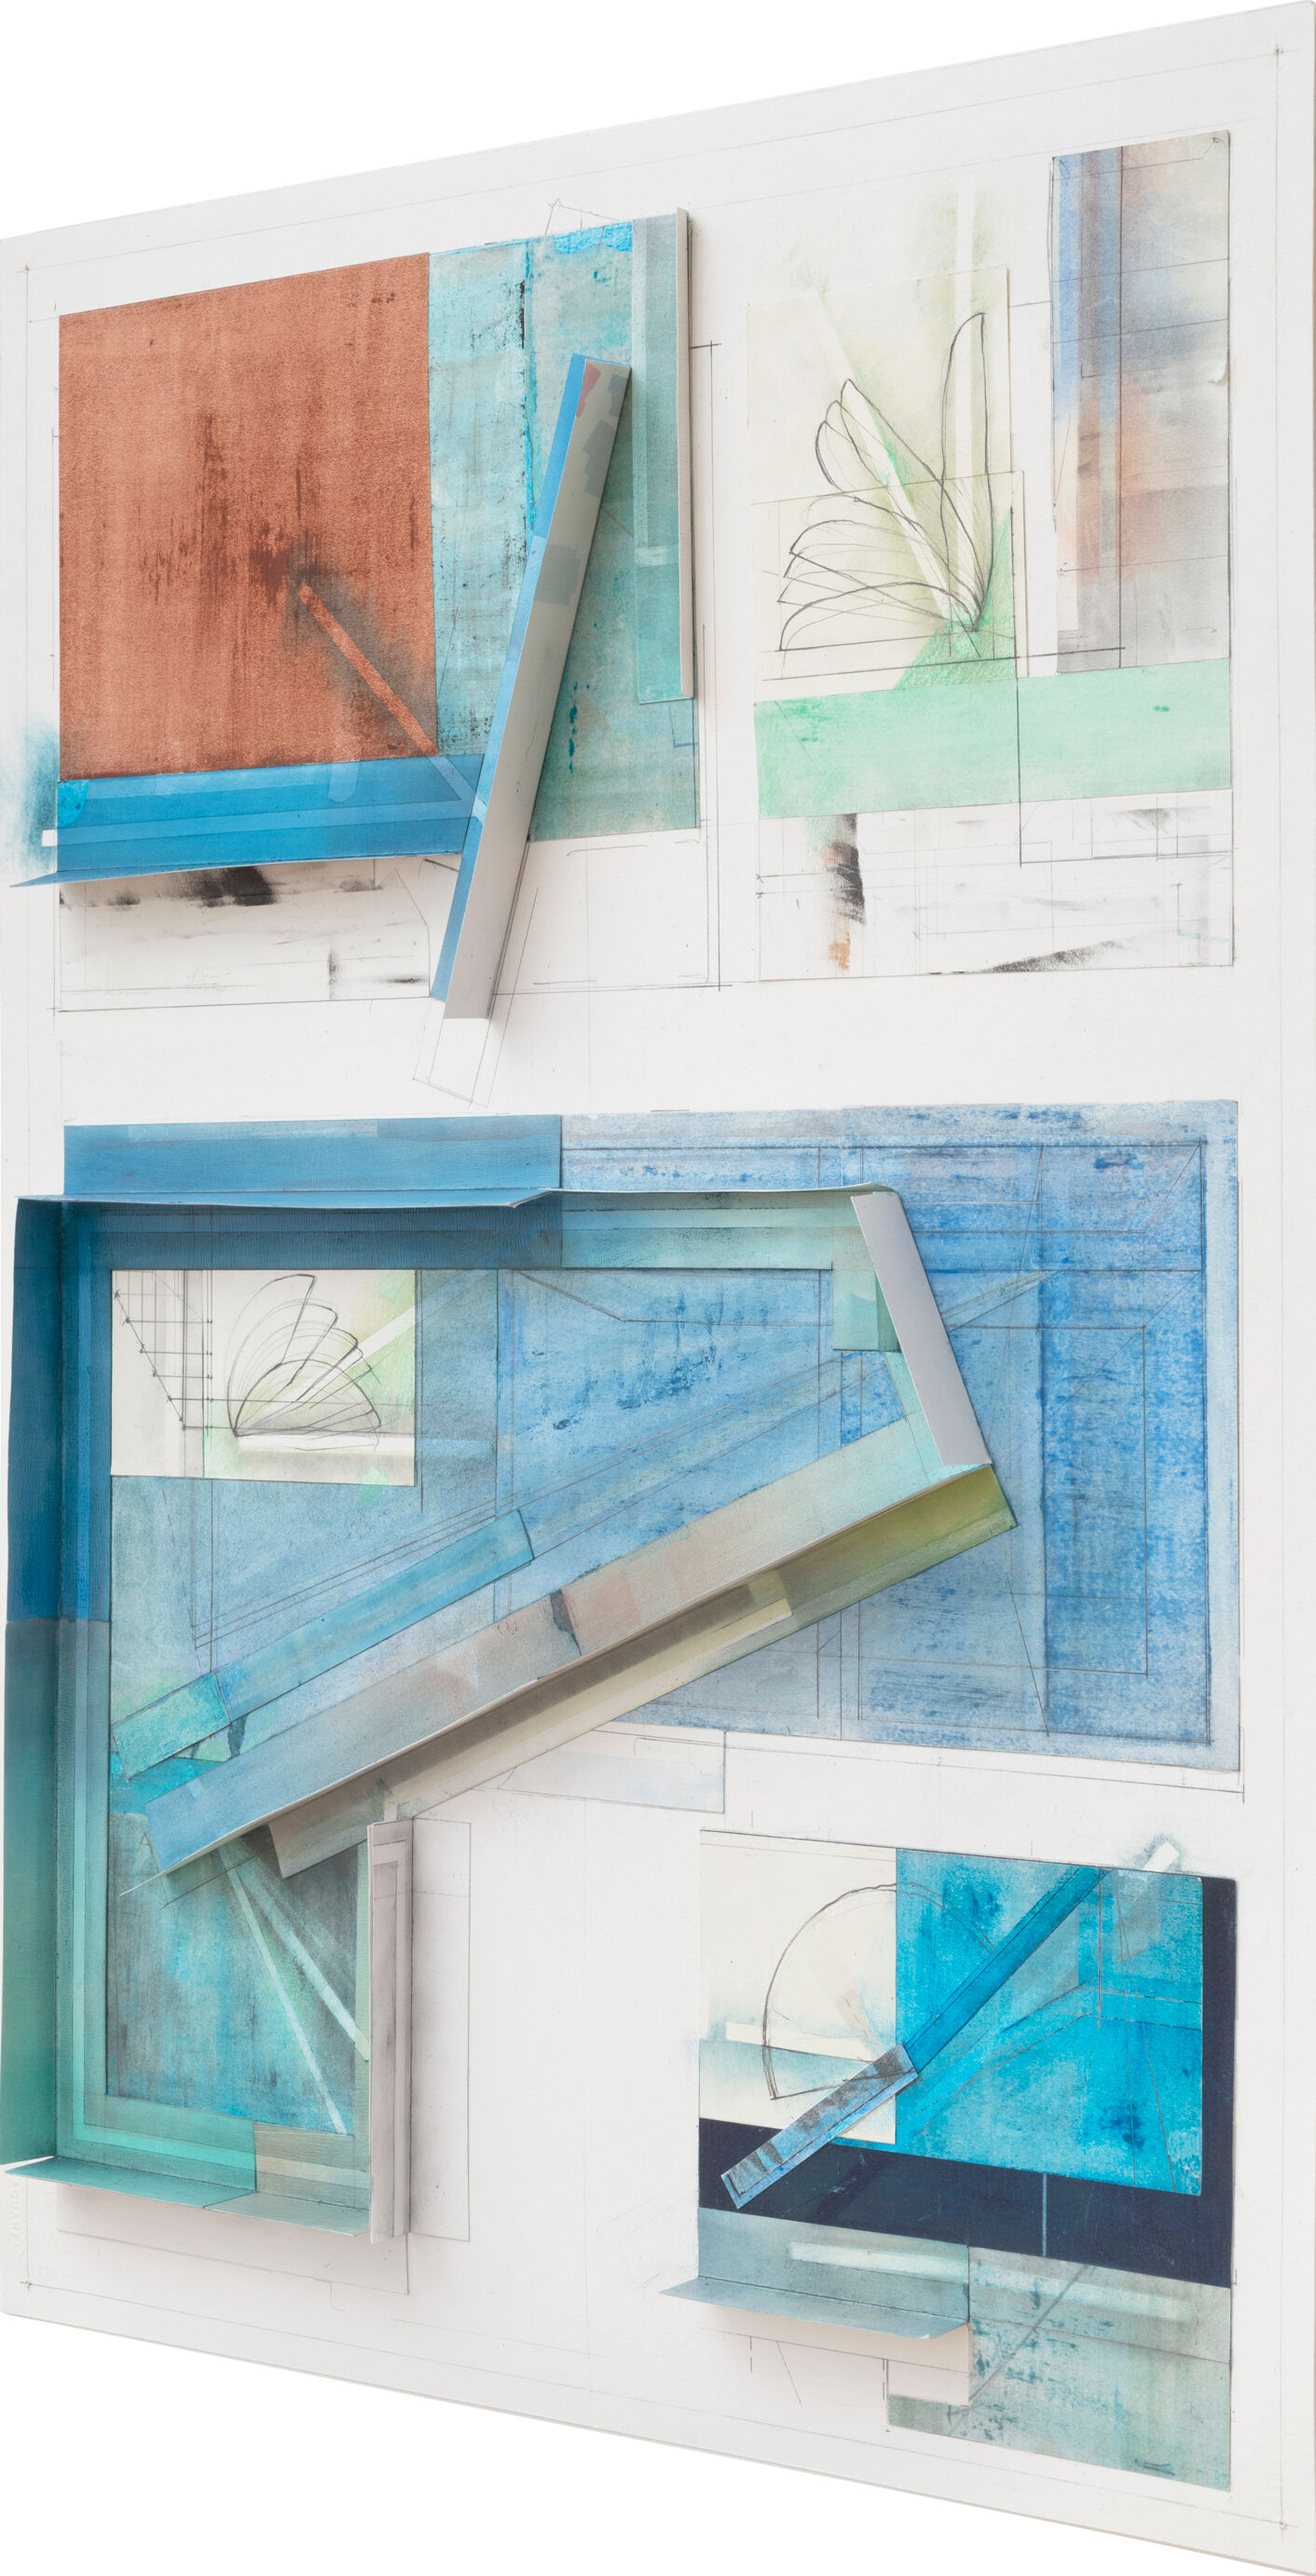 deb sokolow visualizing architectural attempts to continually construct sacred water features